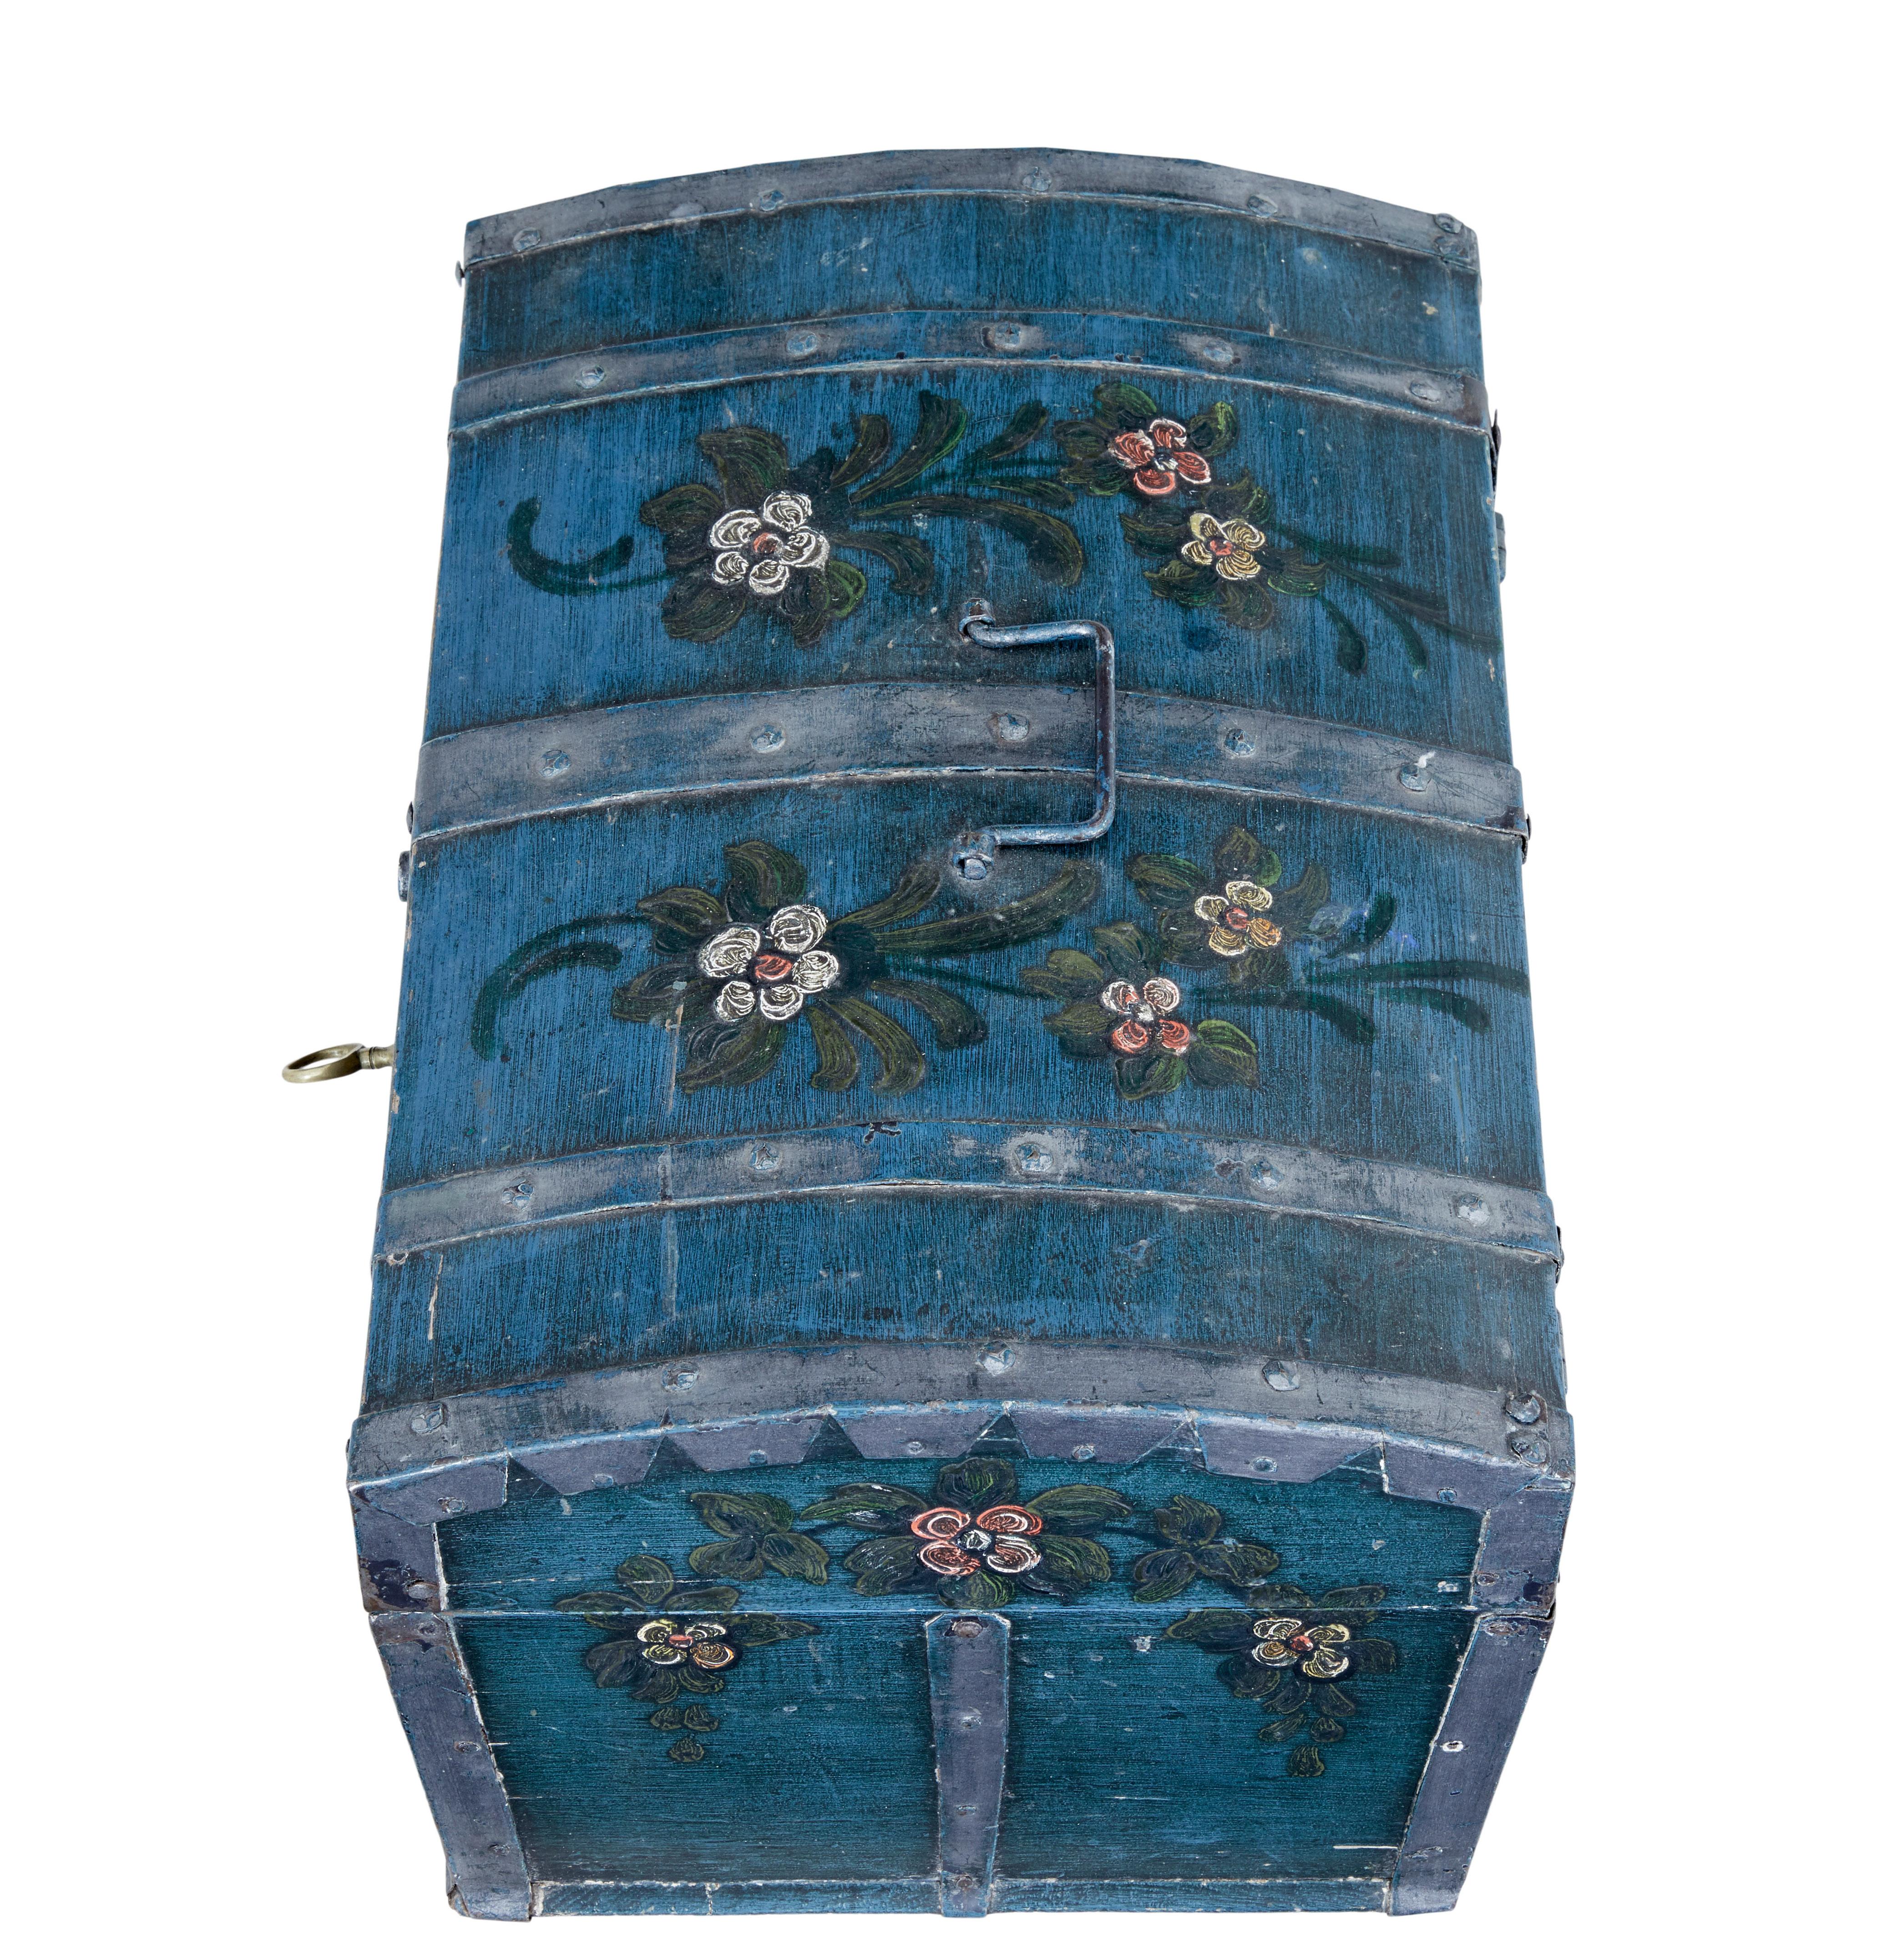 Scandinavian mid-19th century hand painted dome top pine box circa 1850.

Fine example of mid-19th century swedish traditional decoration. Blue/green main colour with hand painted flowers on all viewable surfaces. Complete with original strapwork